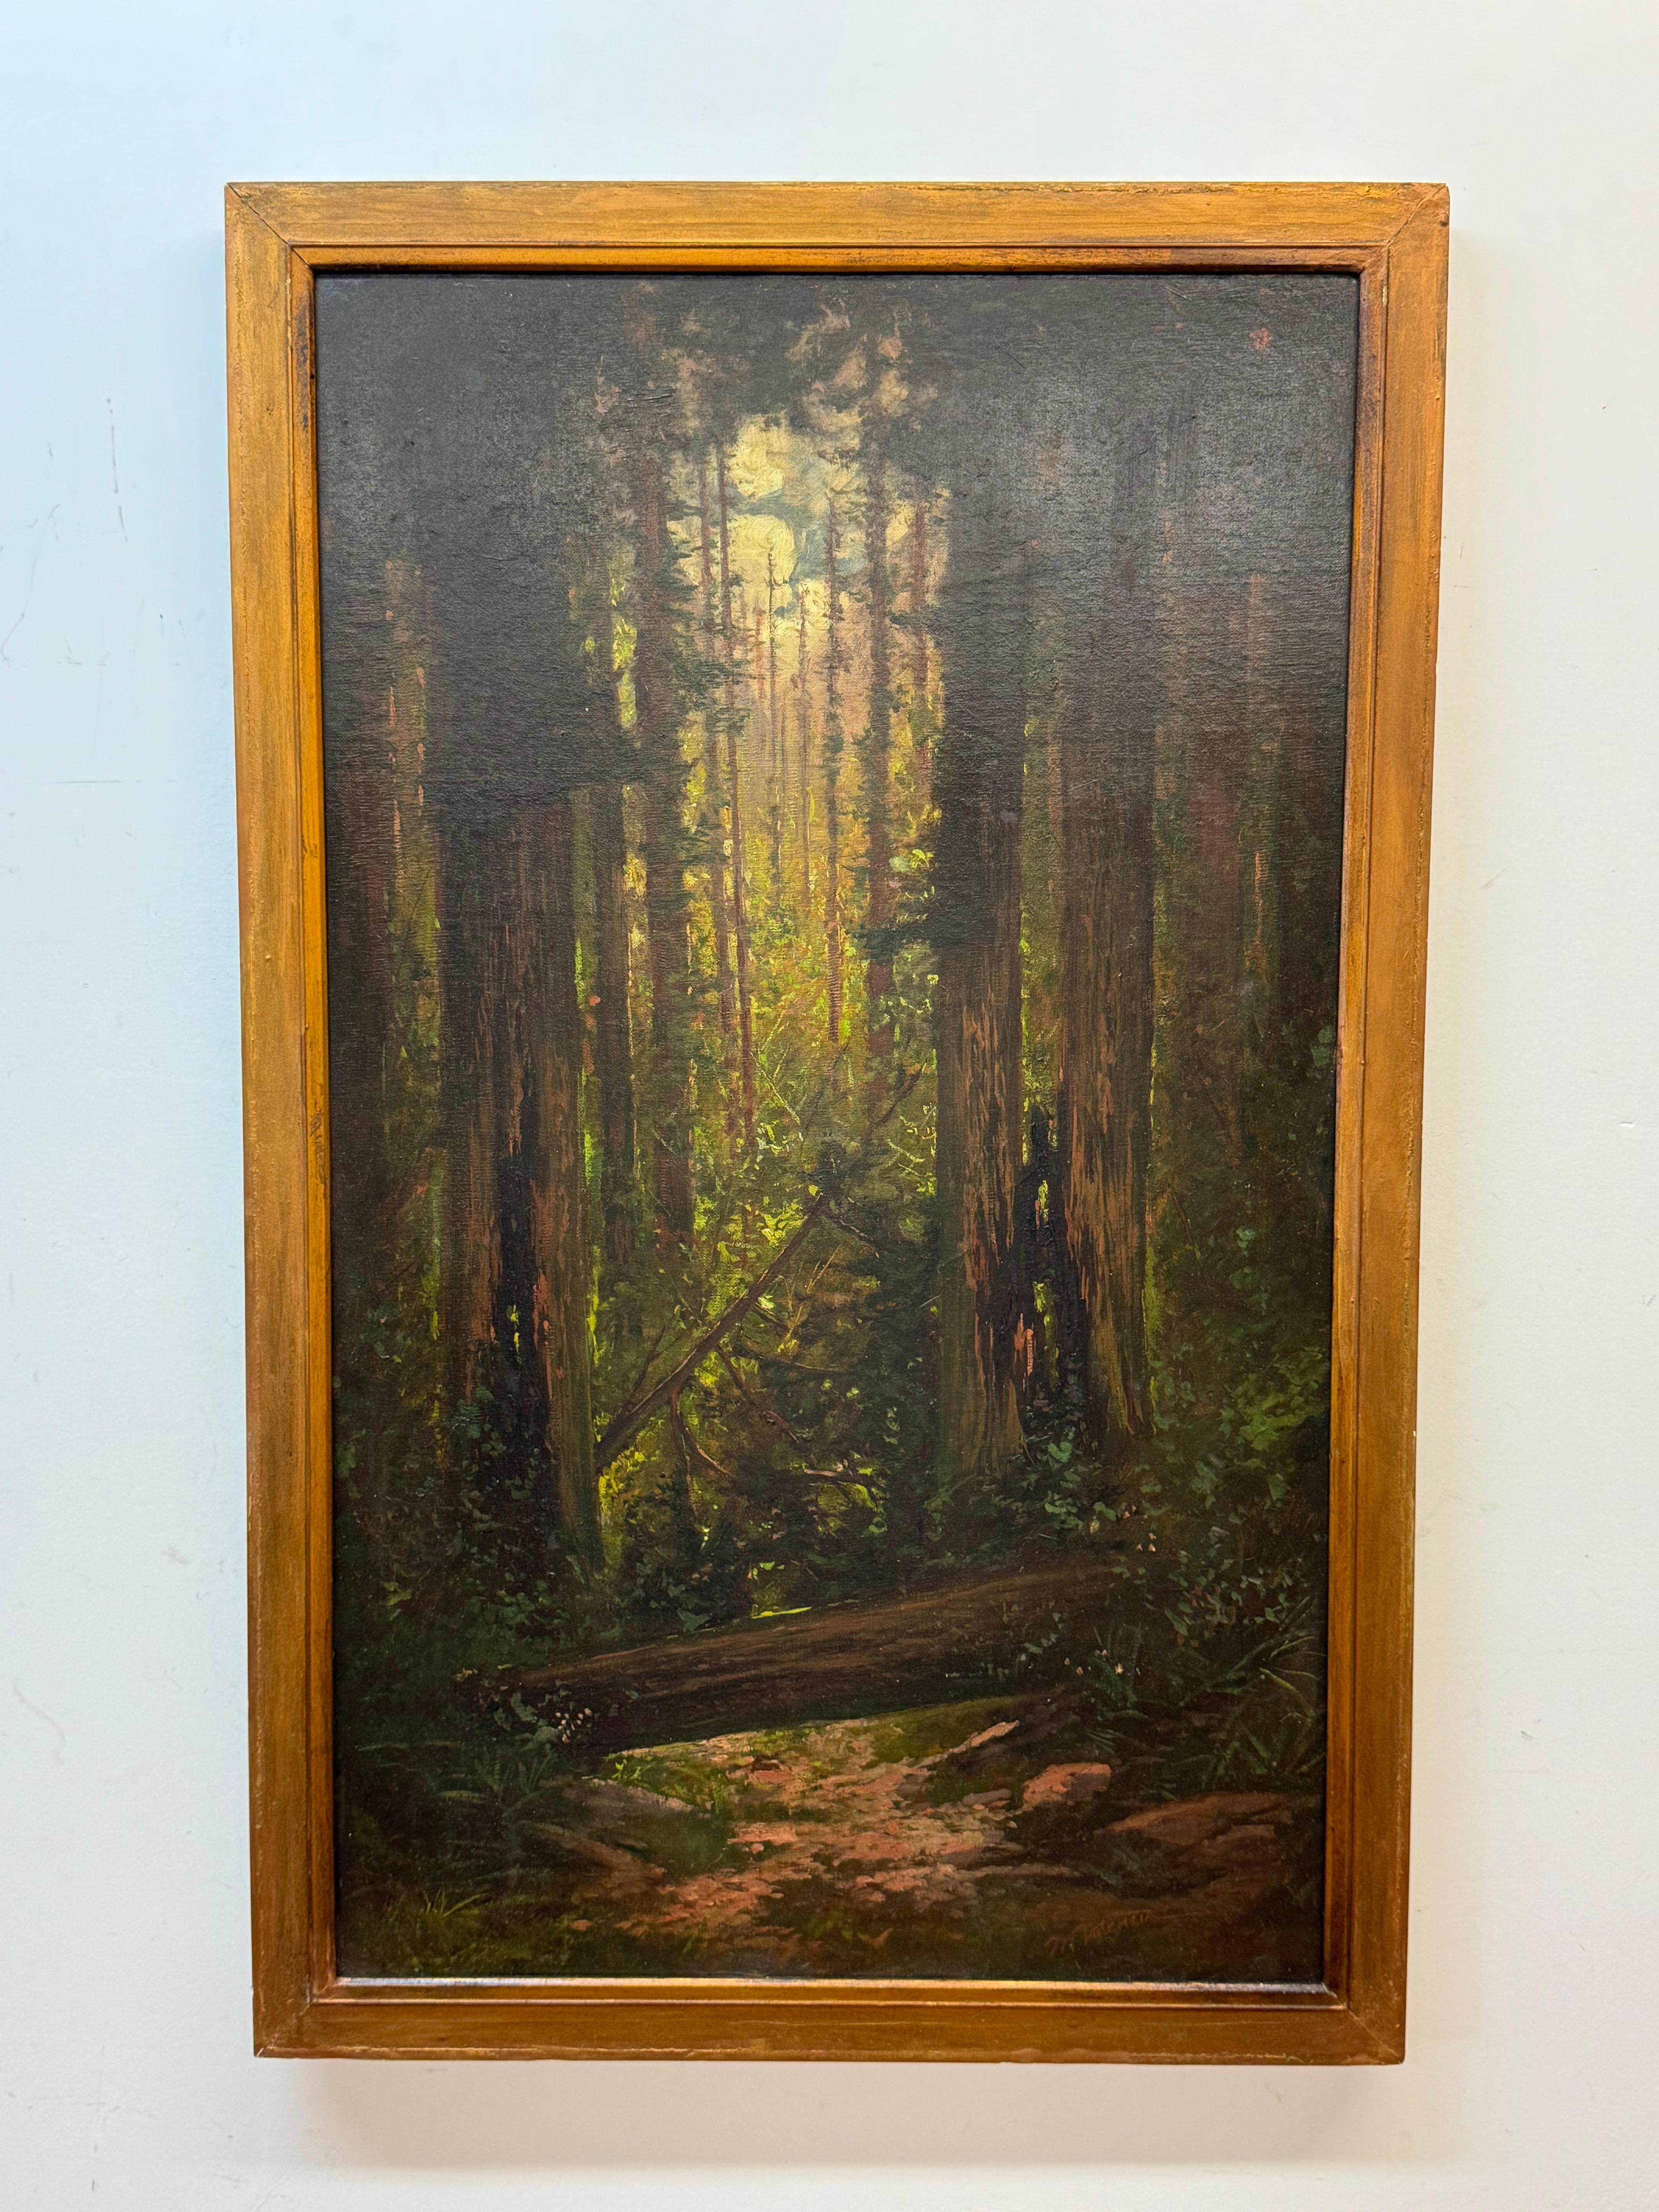 Manuel Valencia (1856–1935) early 20th century redwood forest landscape painting. Oil on canvas. 18 x 31 framed, 20.5 x 32.5 framed.